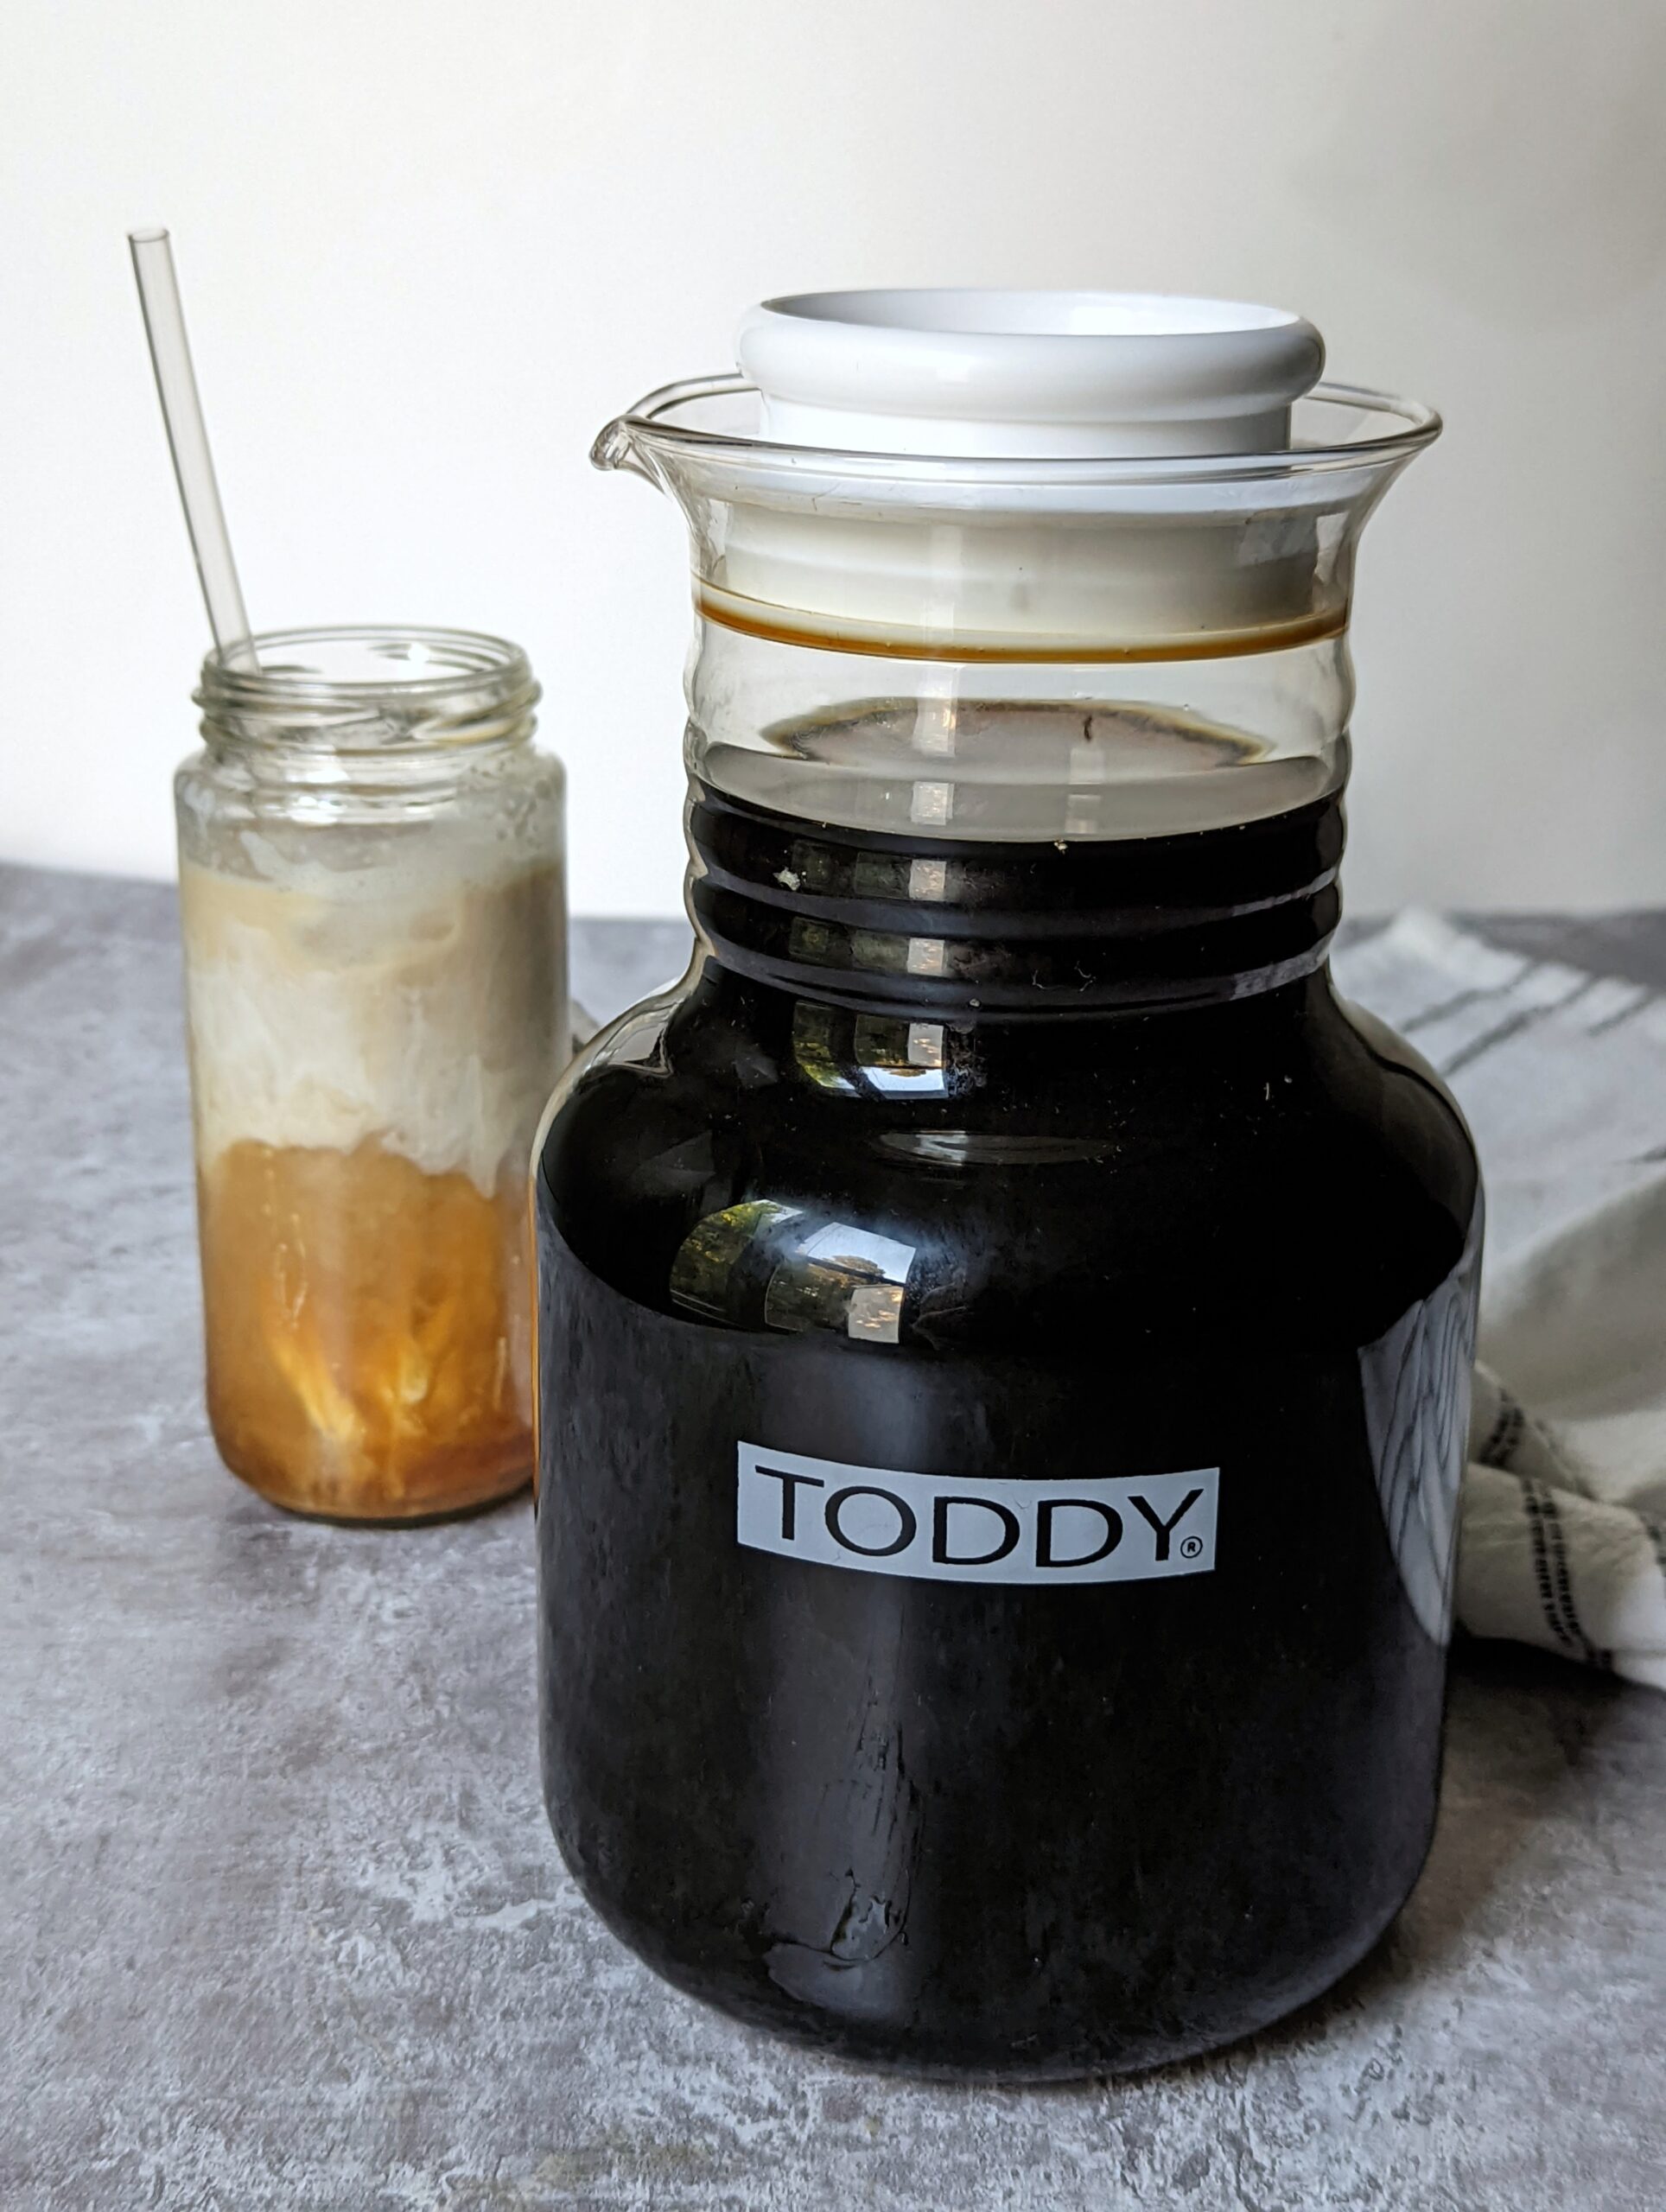 Cold brew concentrate in a toddy next to a cold brew drink.